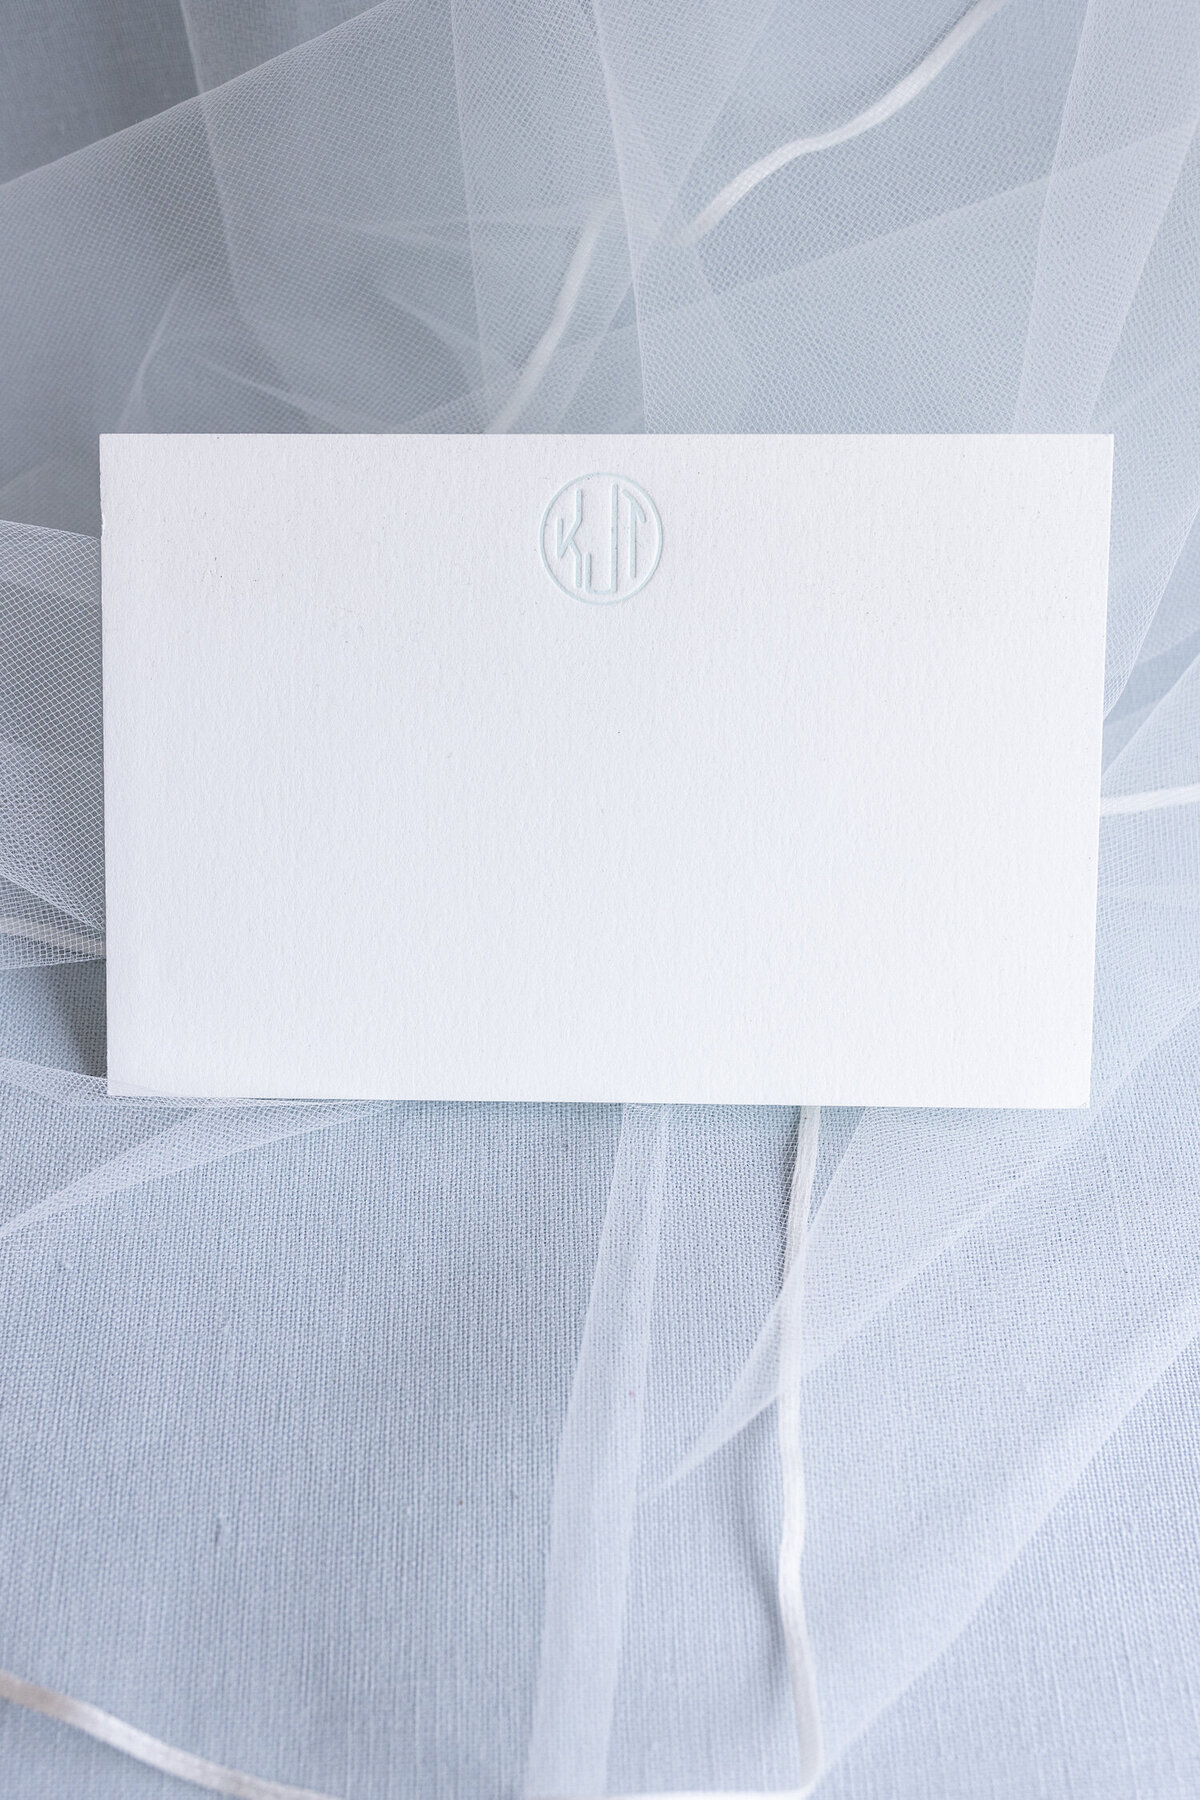 wedding-stationery-the-persnickety-bride